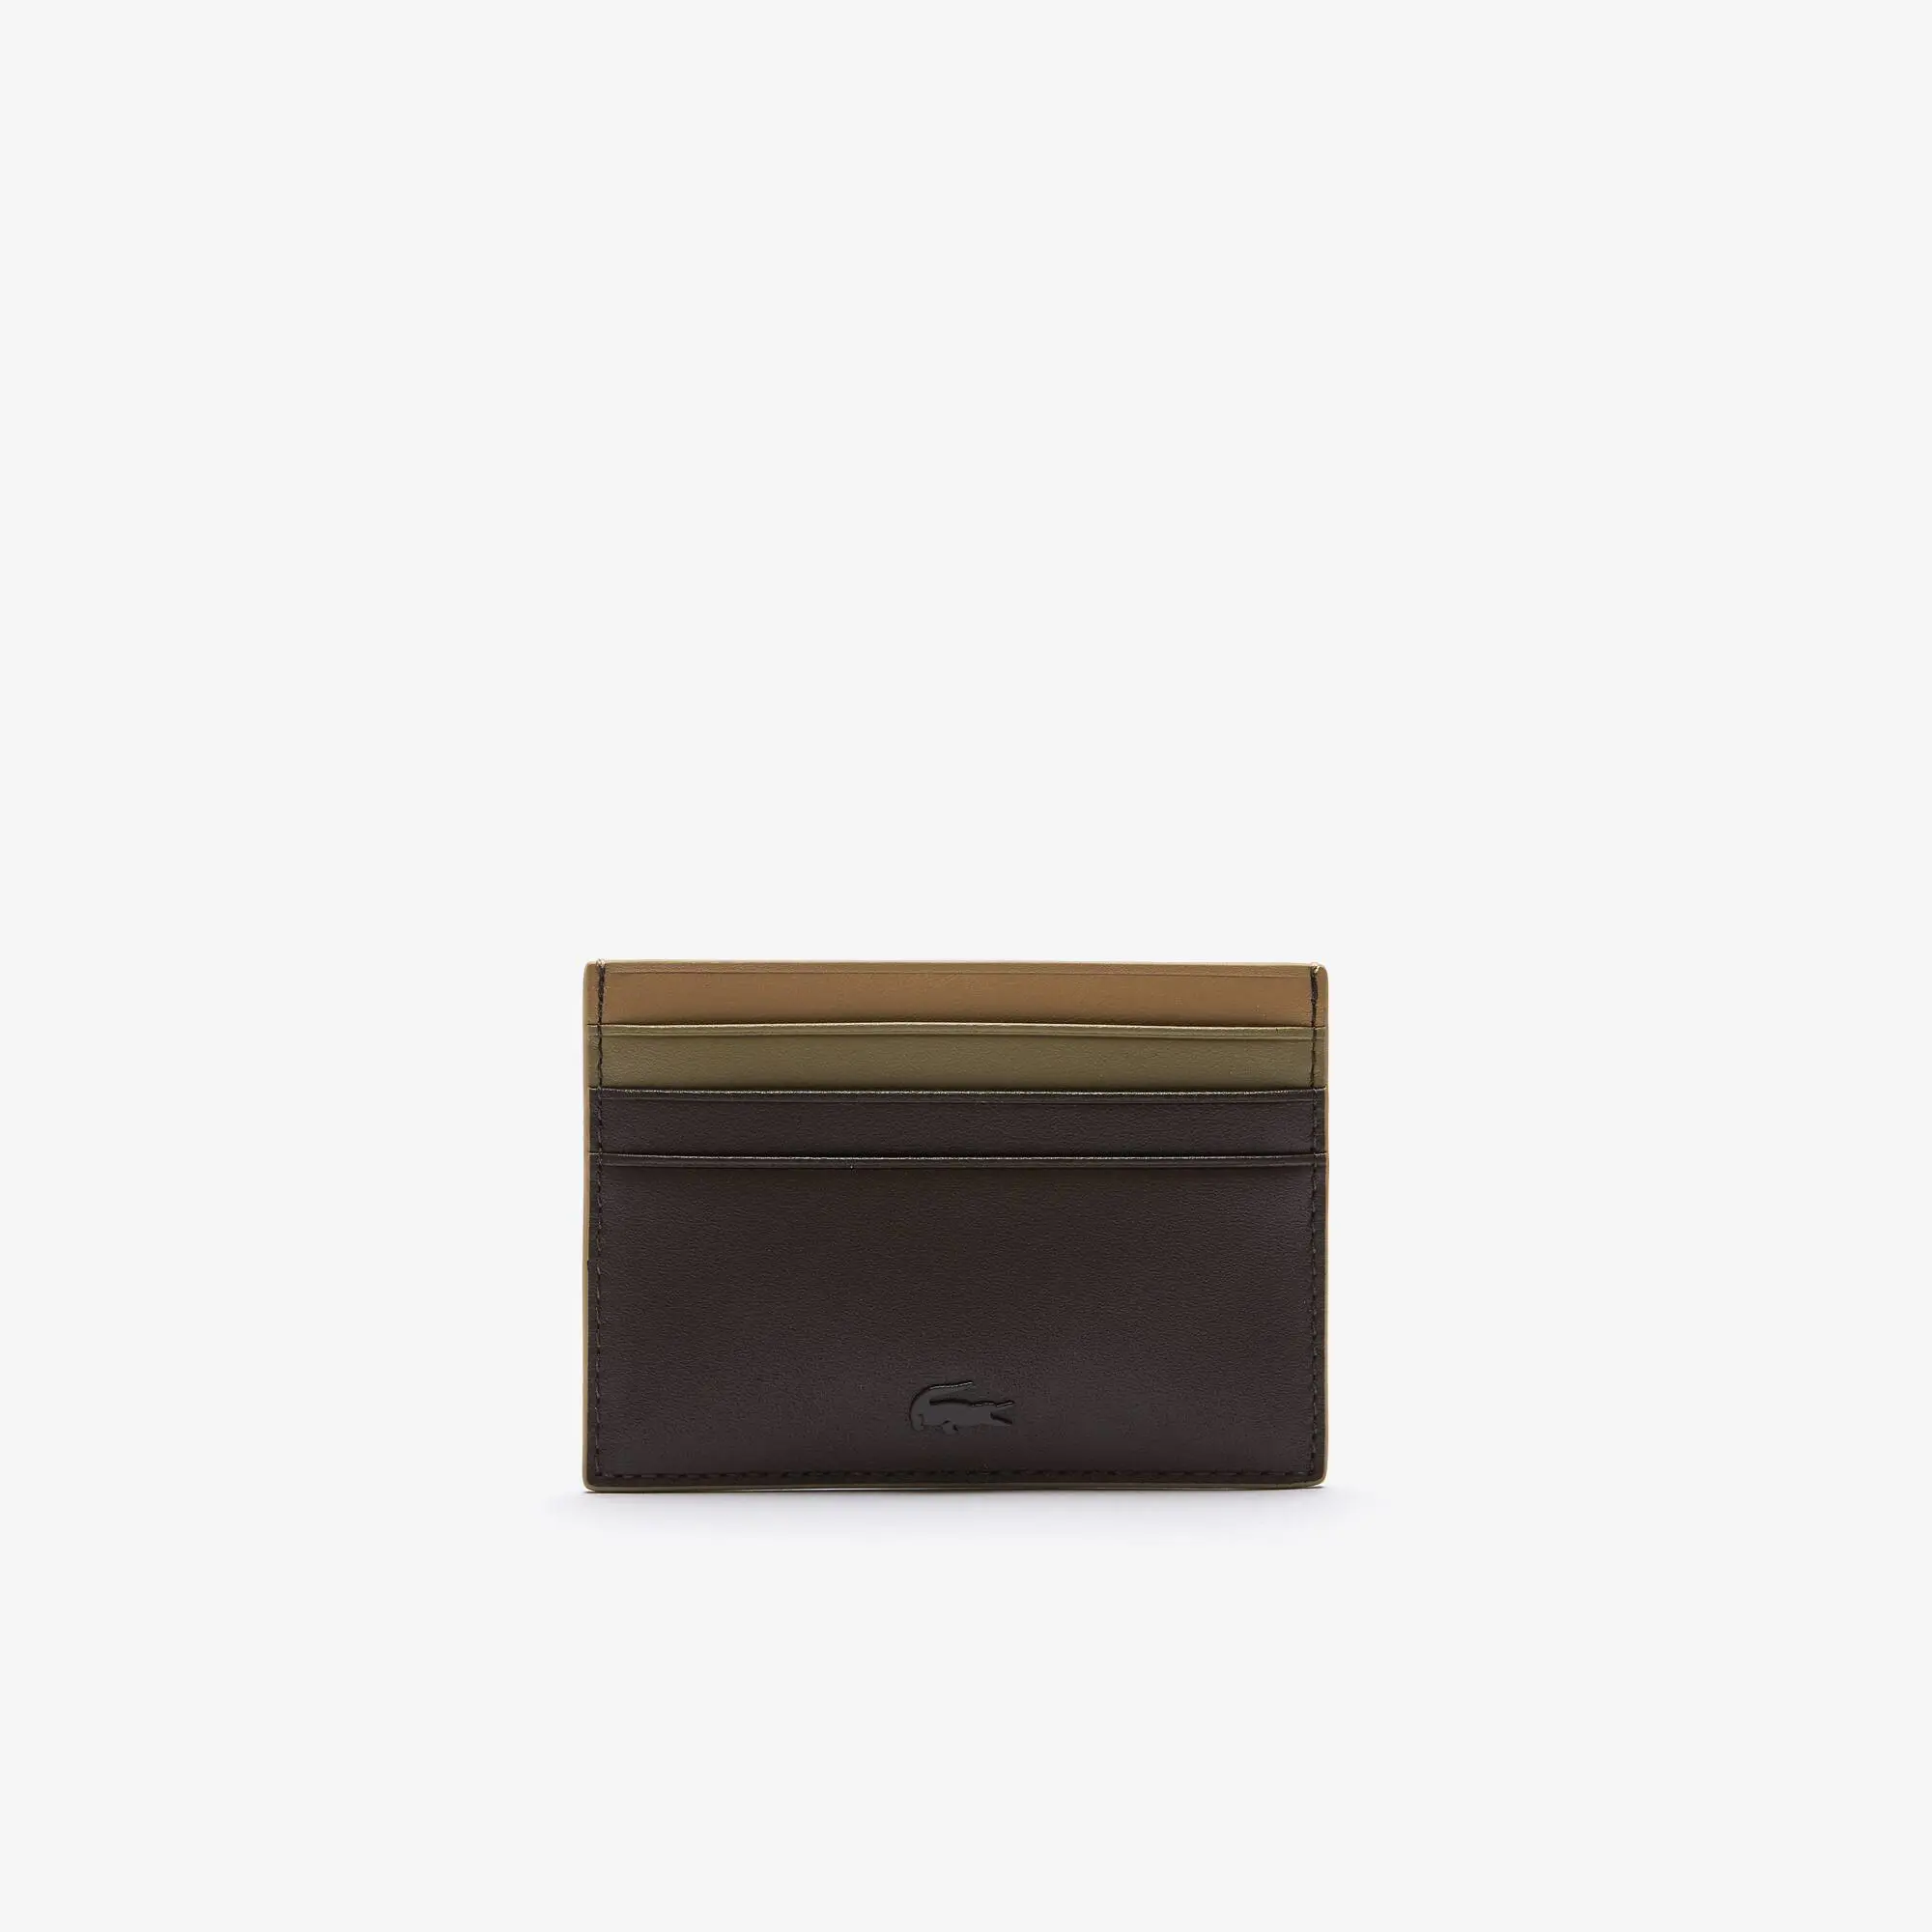 Lacoste Men's Fitzgerald Multicolor Smooth Leather Card Holder. 1